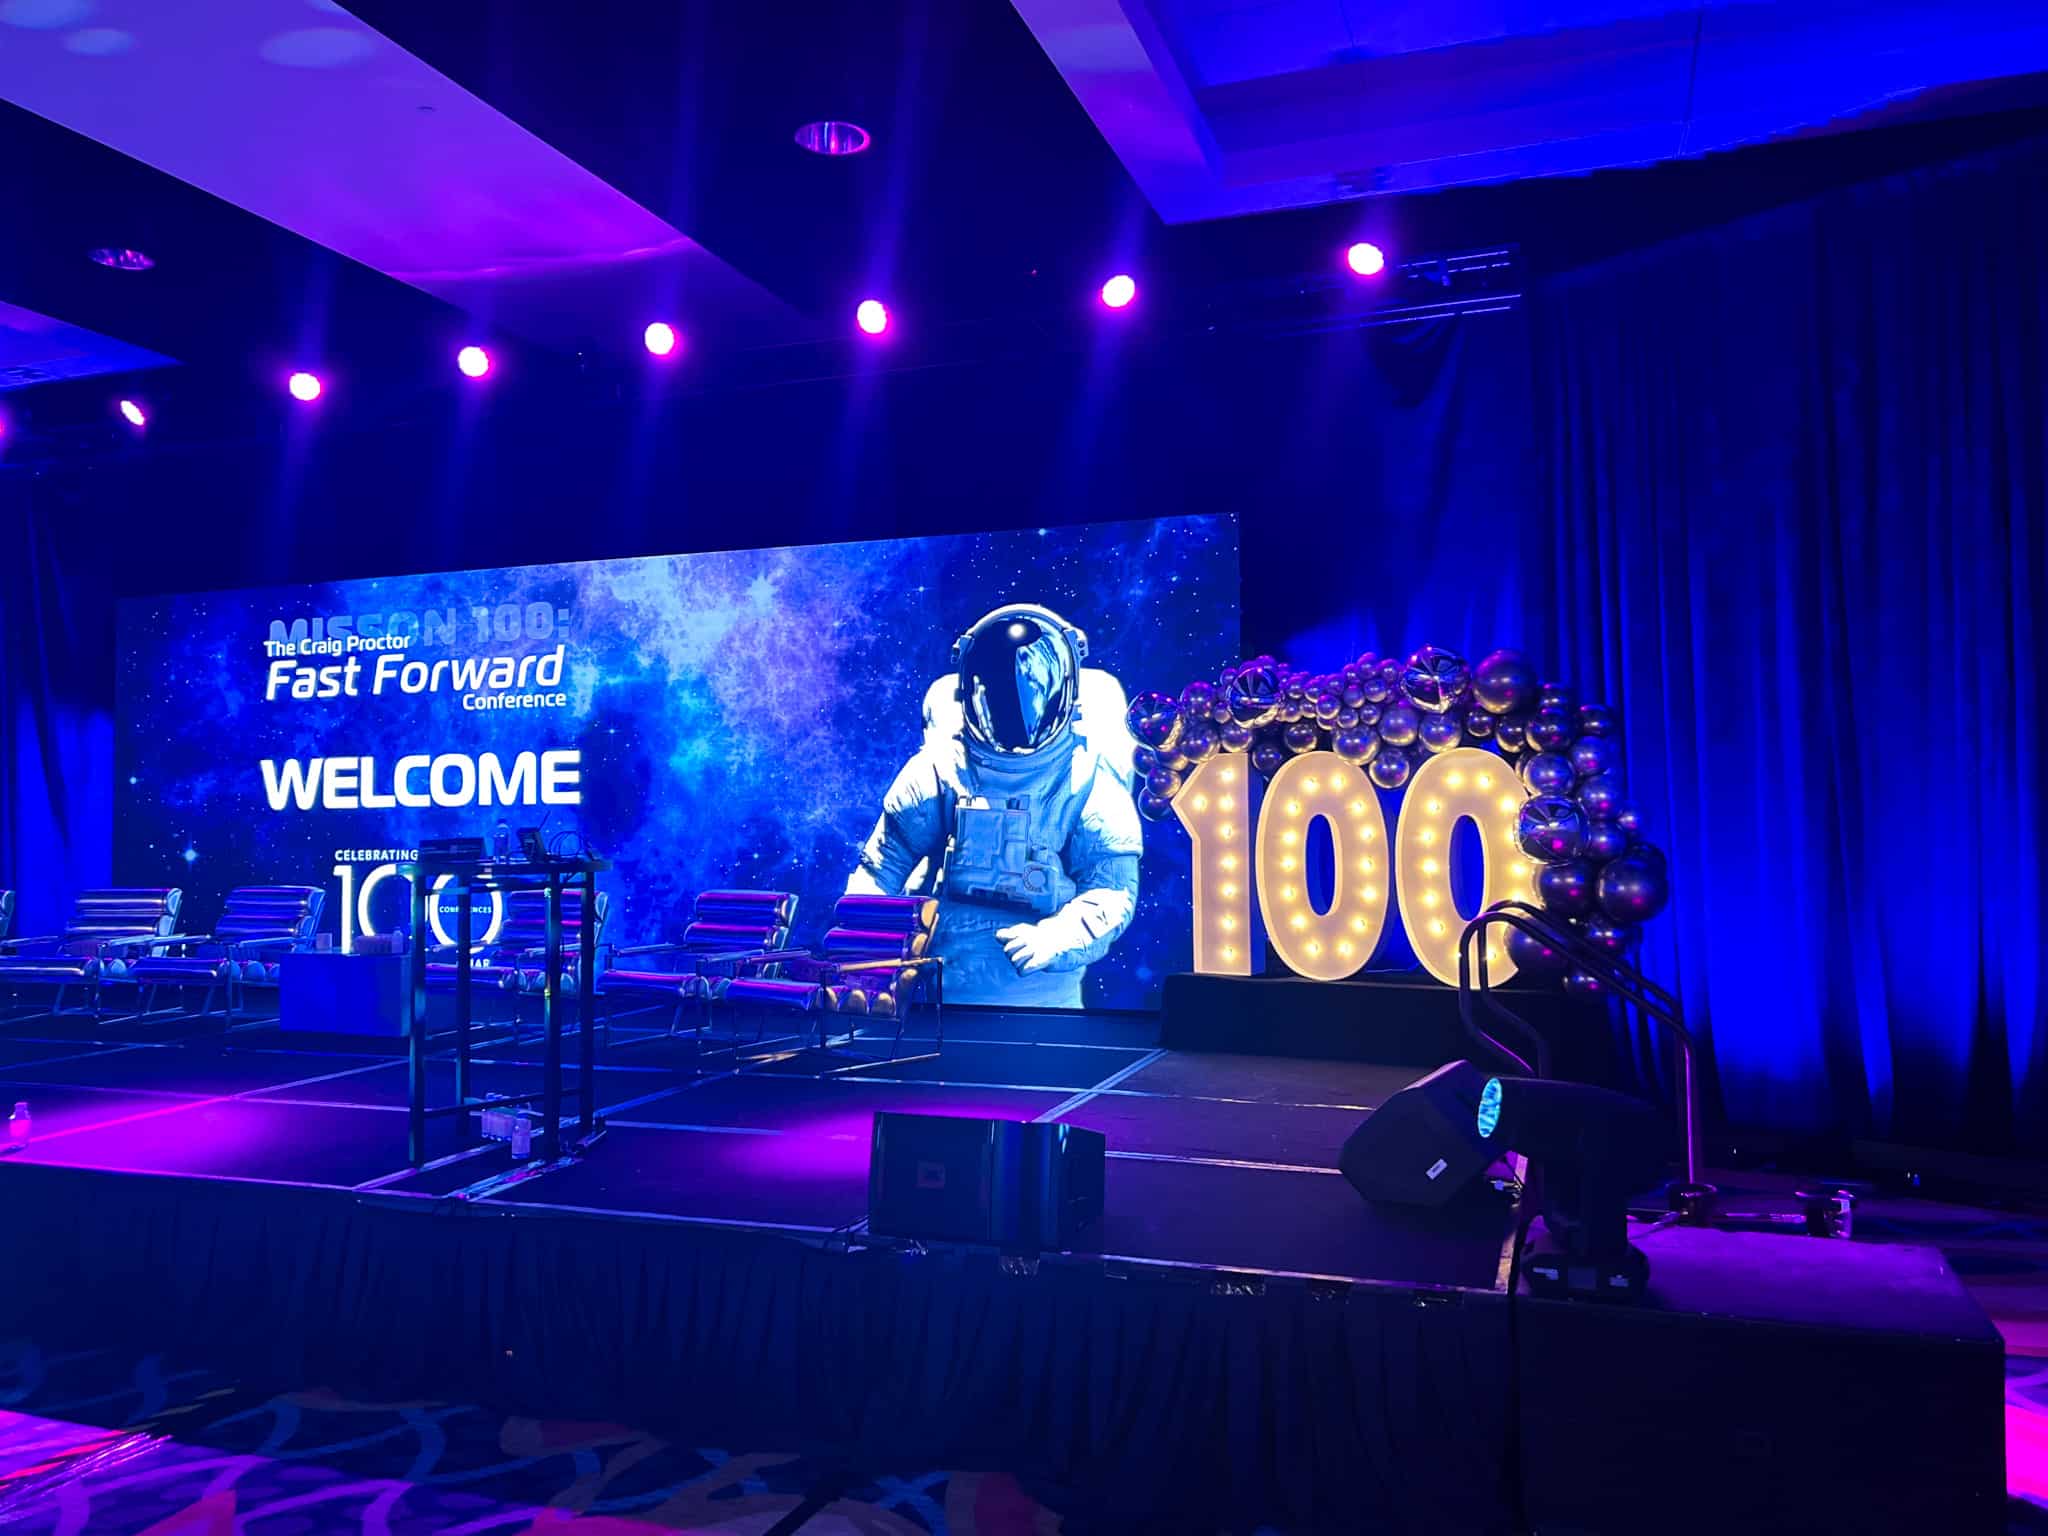 Corporate conference with marquee light up numbers that say ‘100’